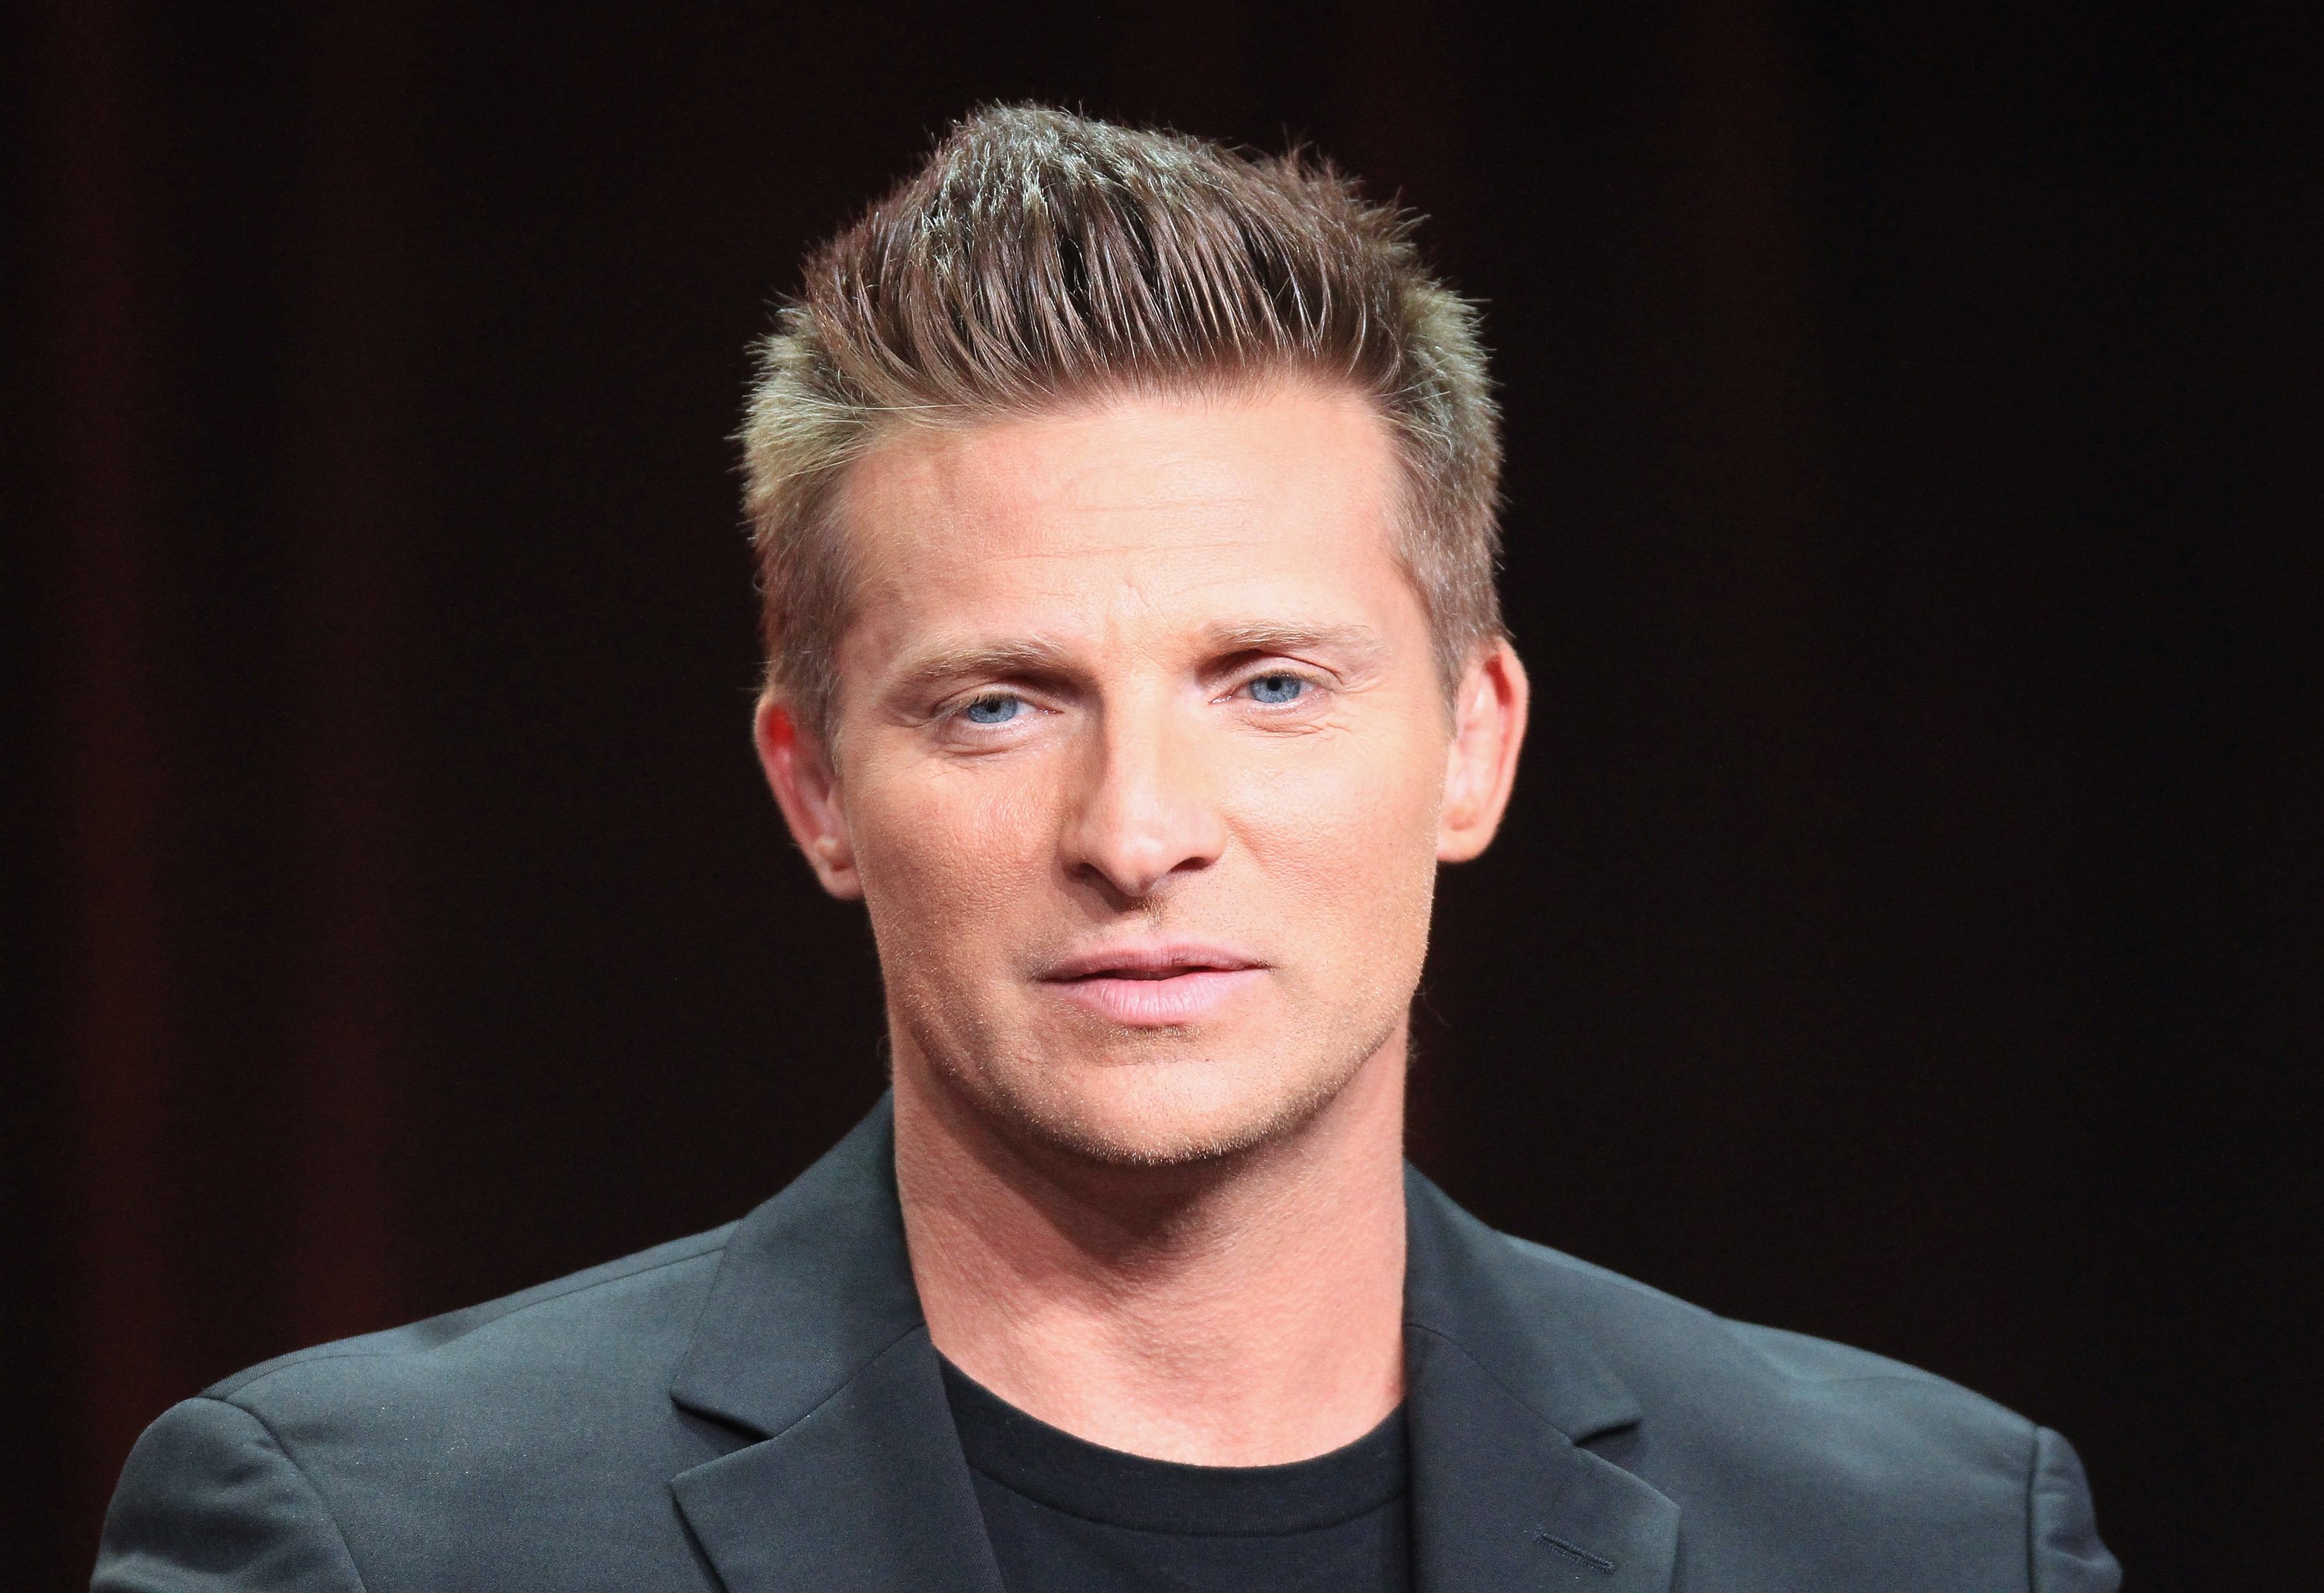 'Days of Our Lives; Beyond Salem' actor Steve Burton wearing a black suit and sitting in front of a black backdrop.